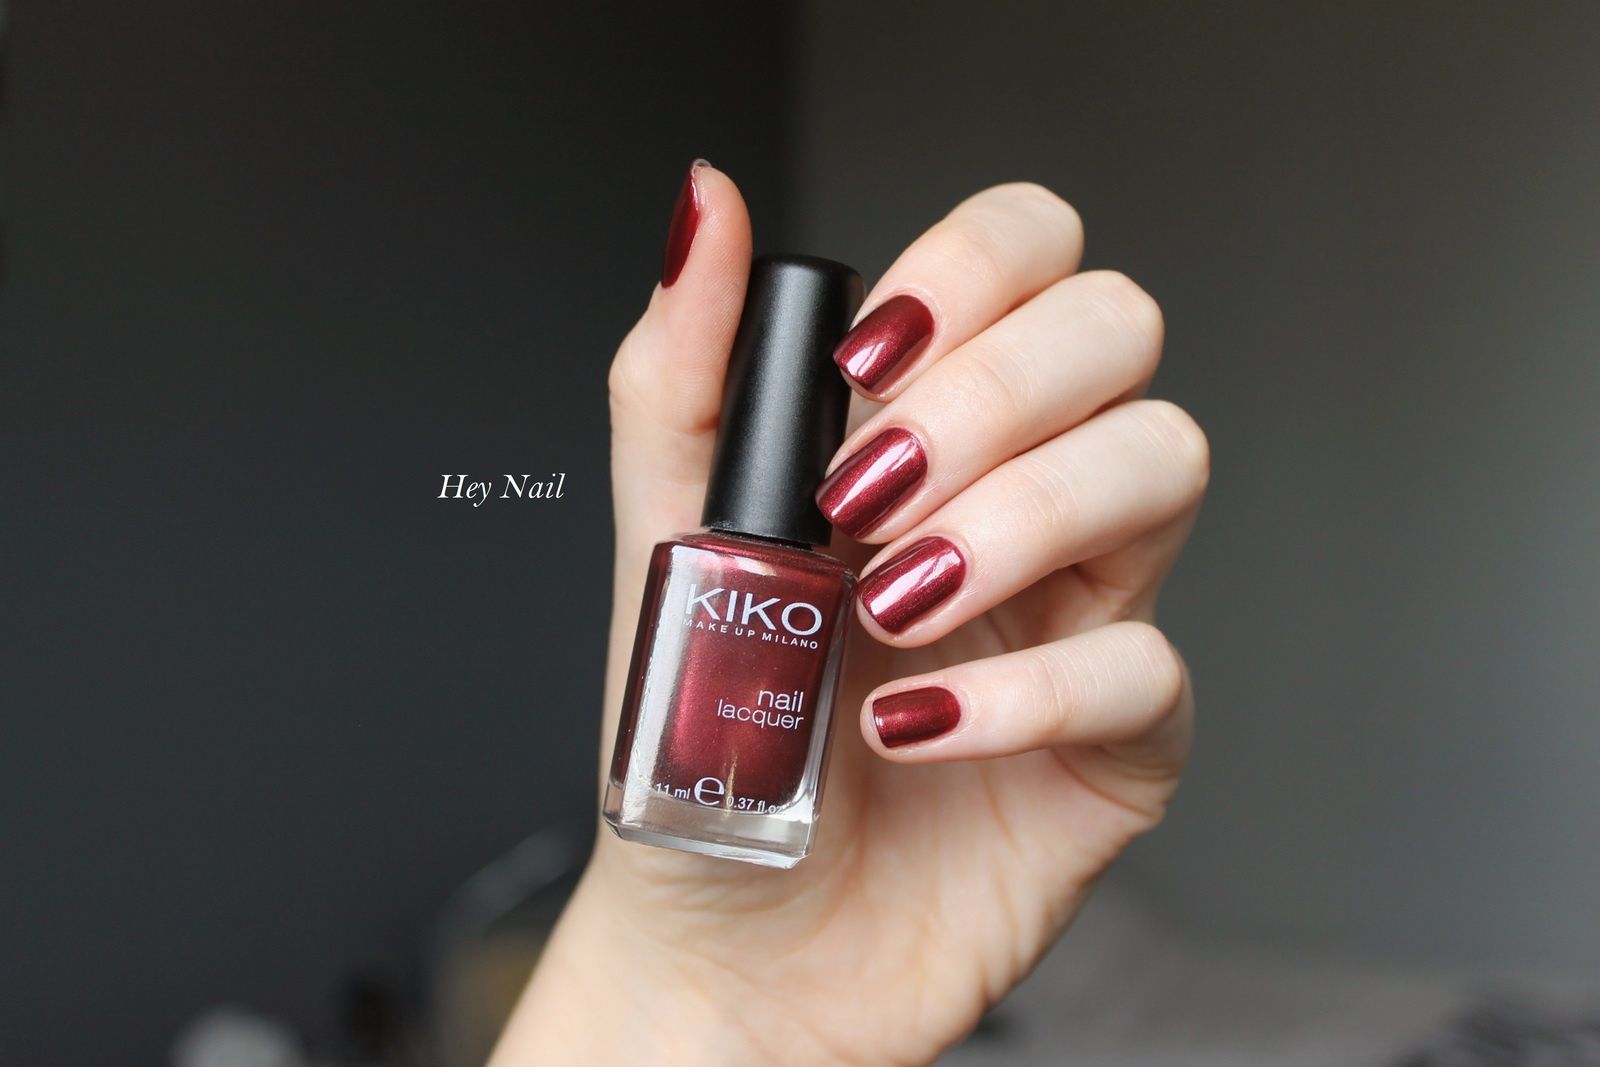 Kiko n°224 - Dark Pearly Copper - Hey Nail - Ongles & Maquillages